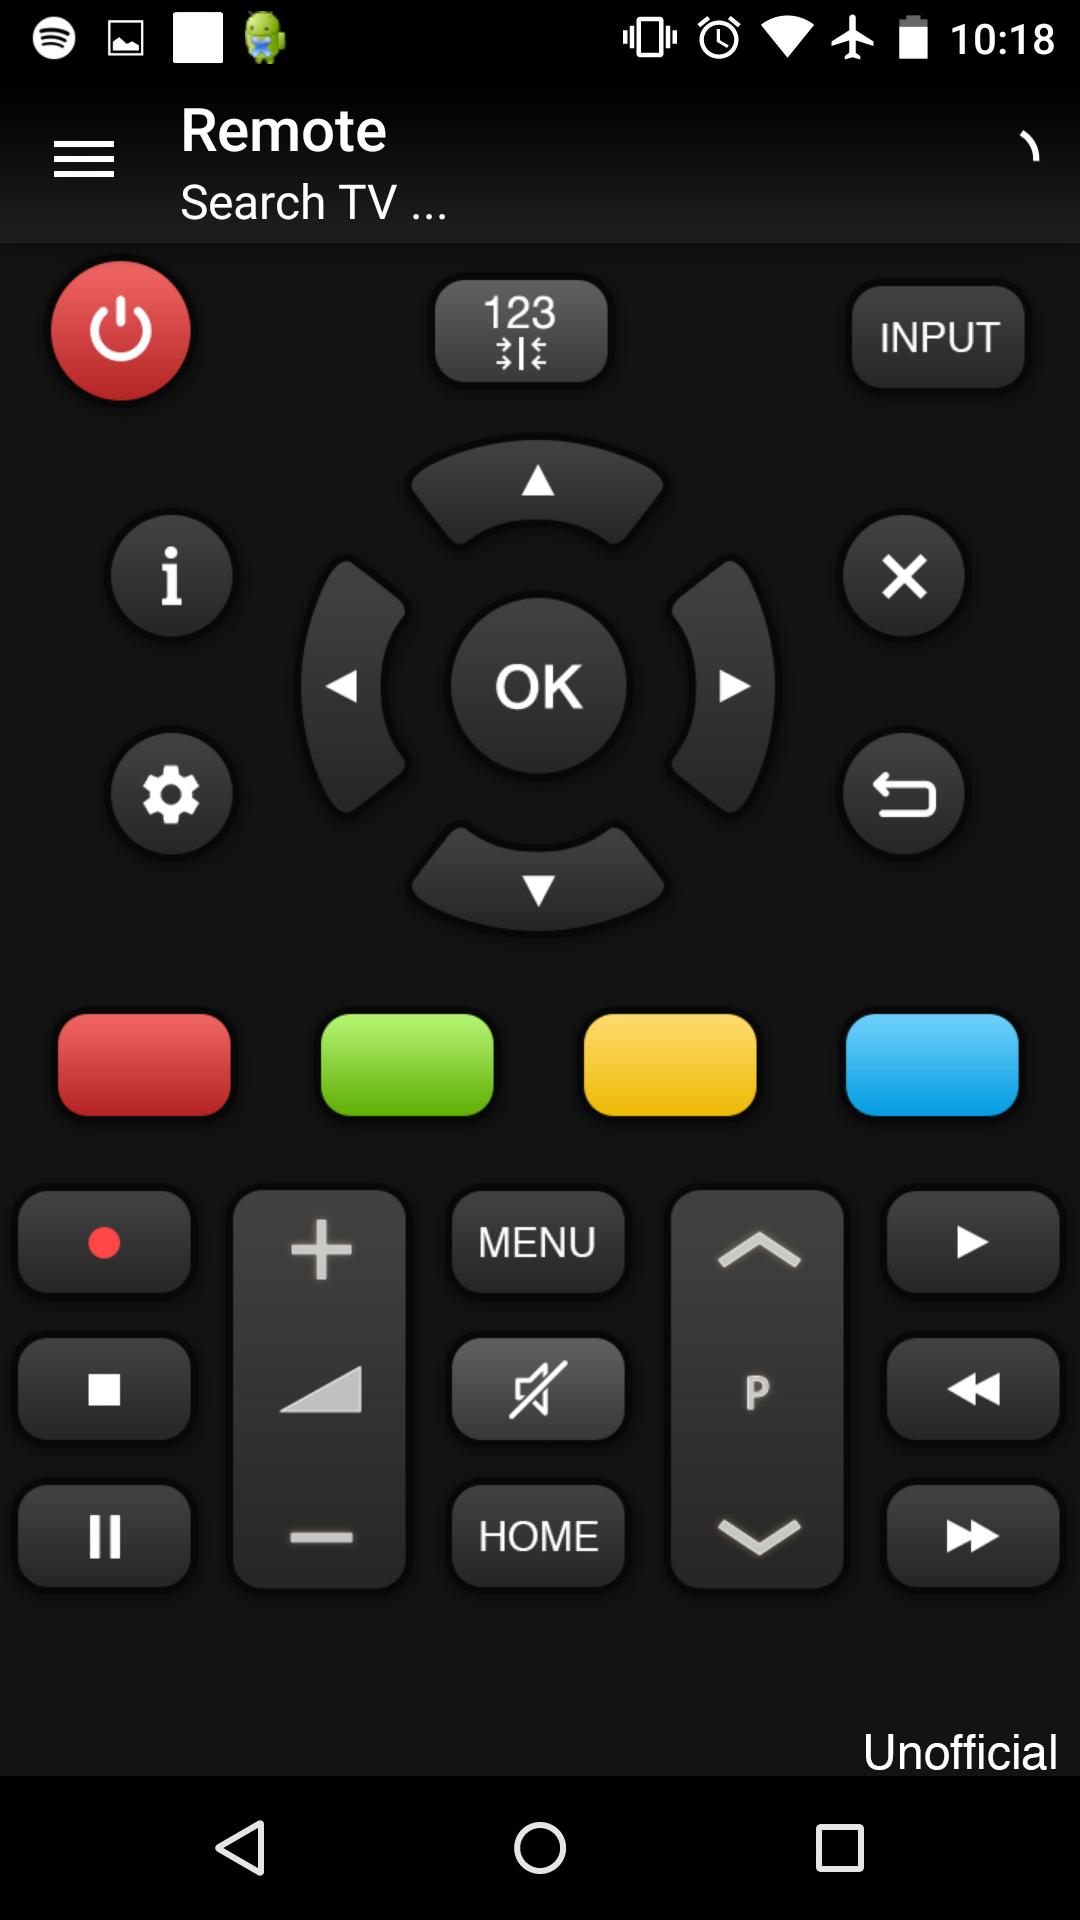 Remote for Panasonic TV for Android - APK Download